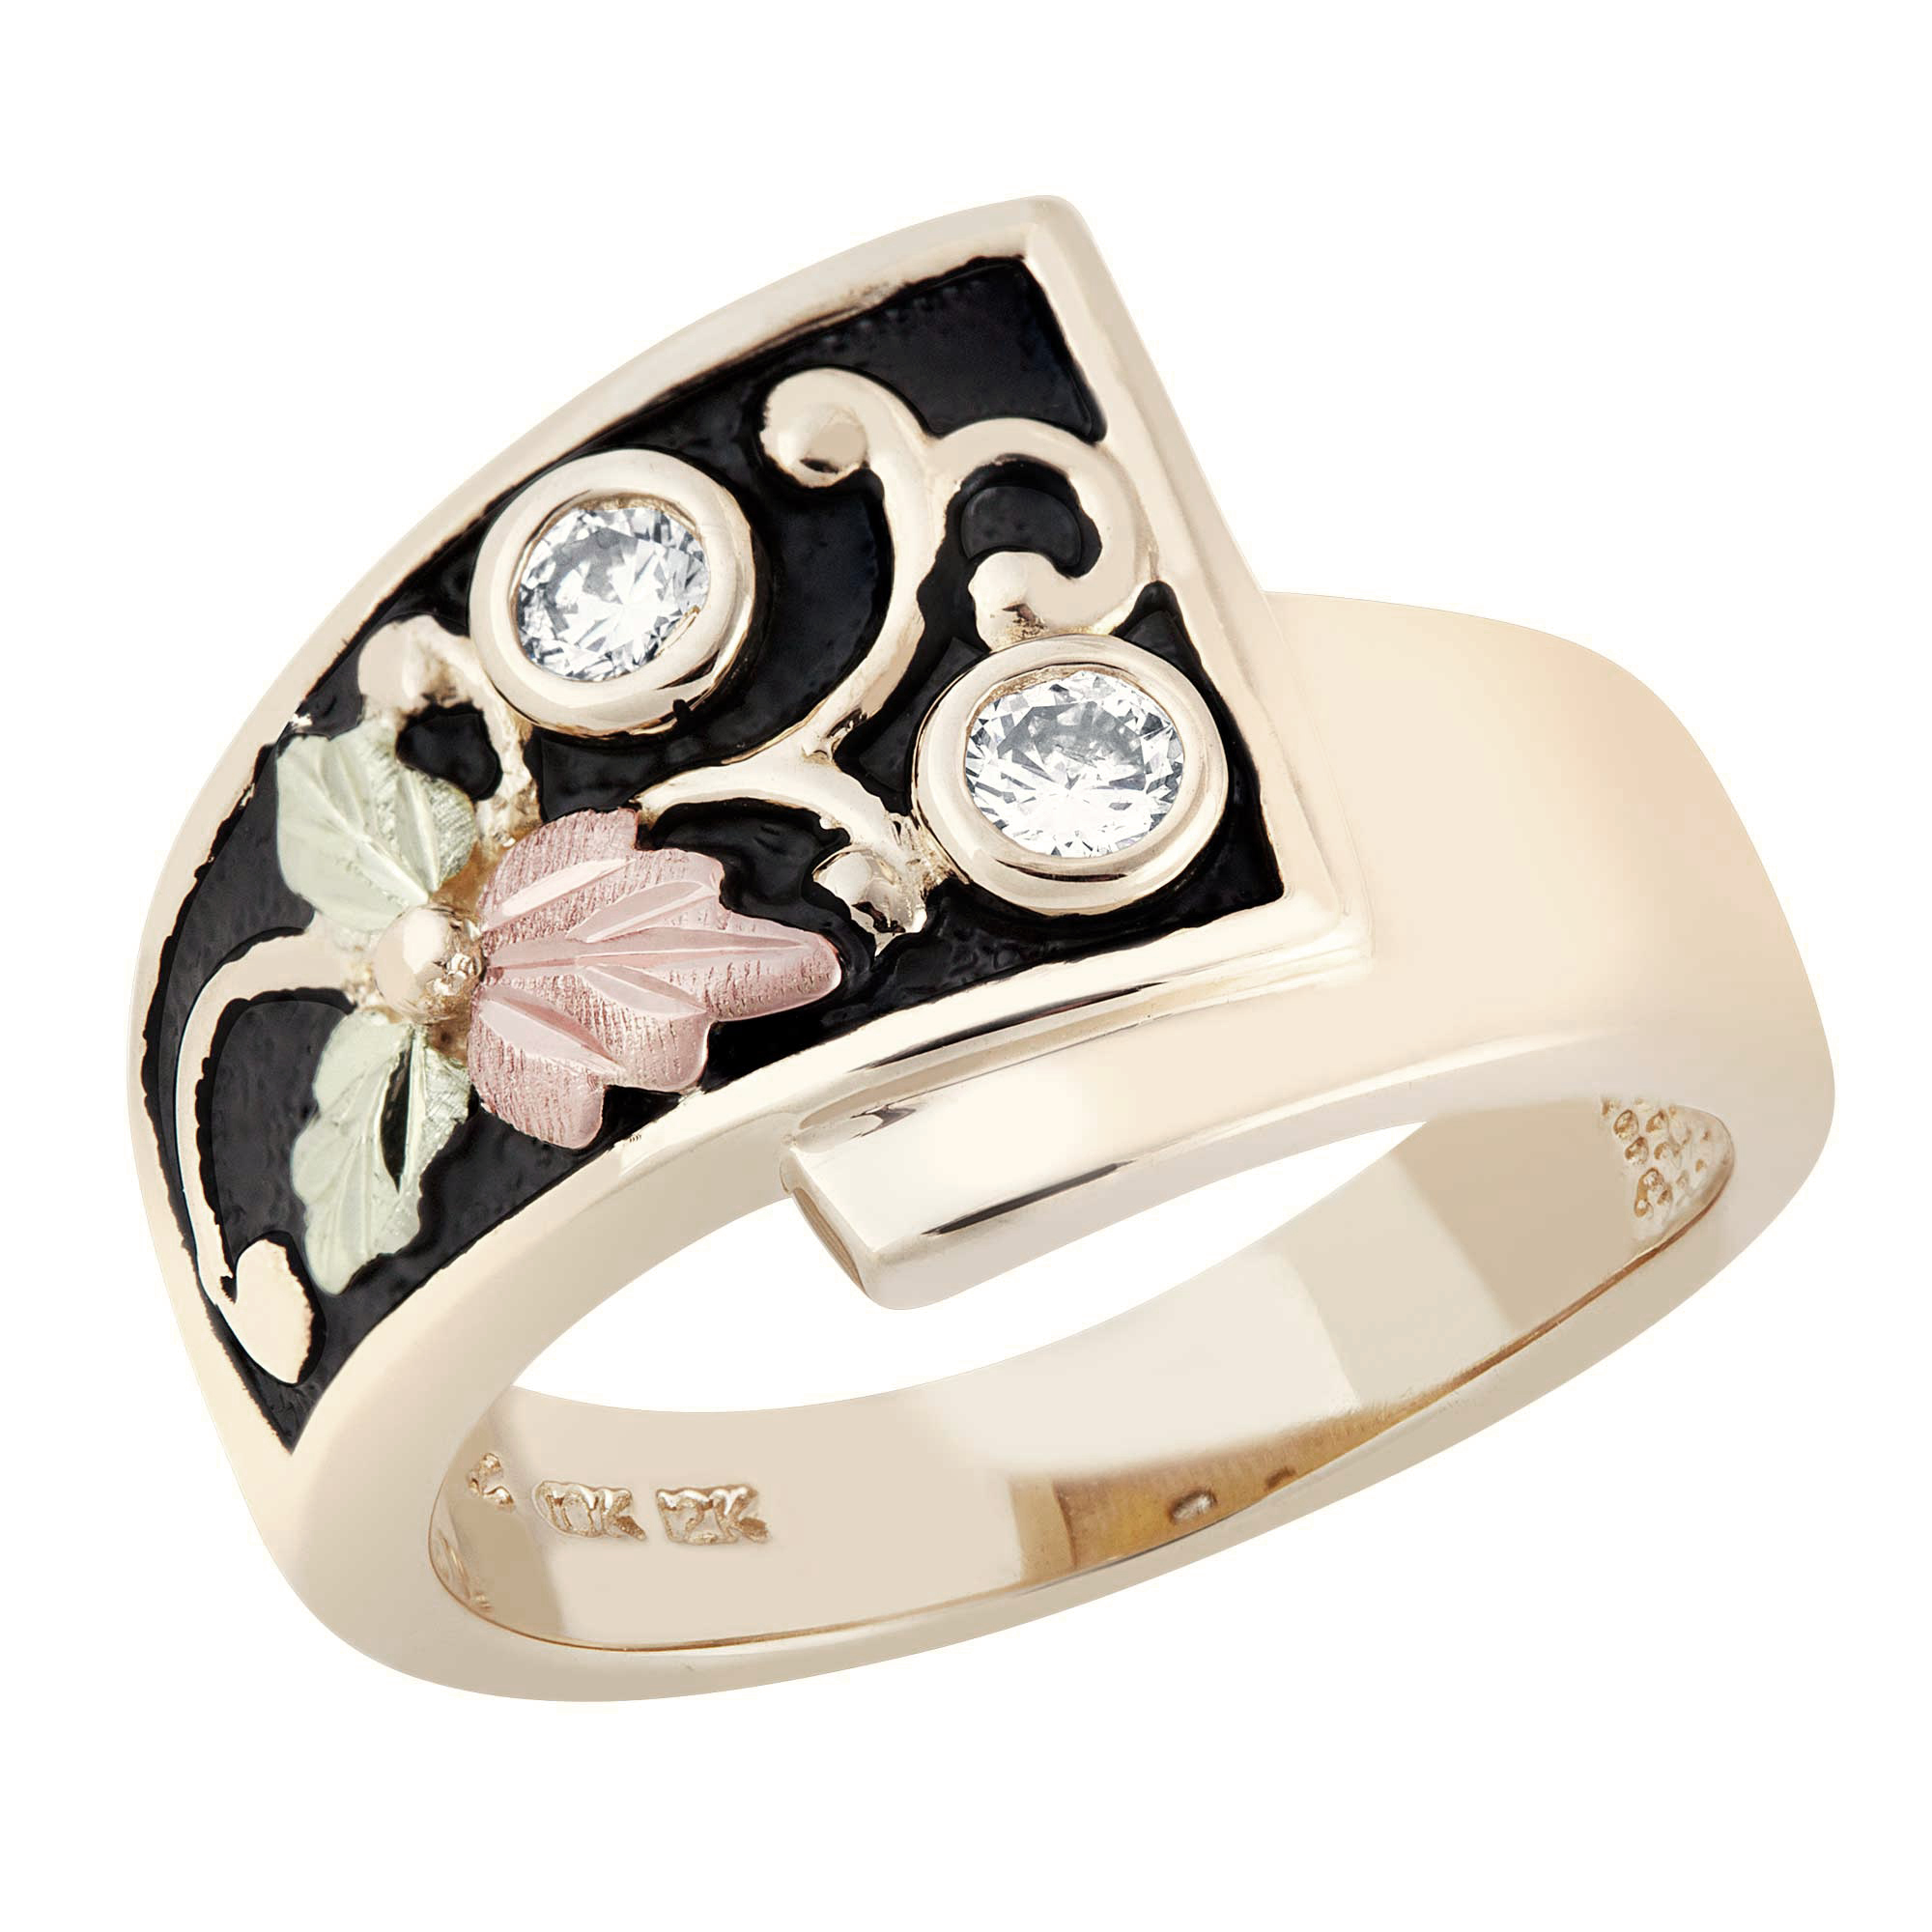 10k Yellow Gold Rose Ring with Diamond and Black Hills Gold motif. 